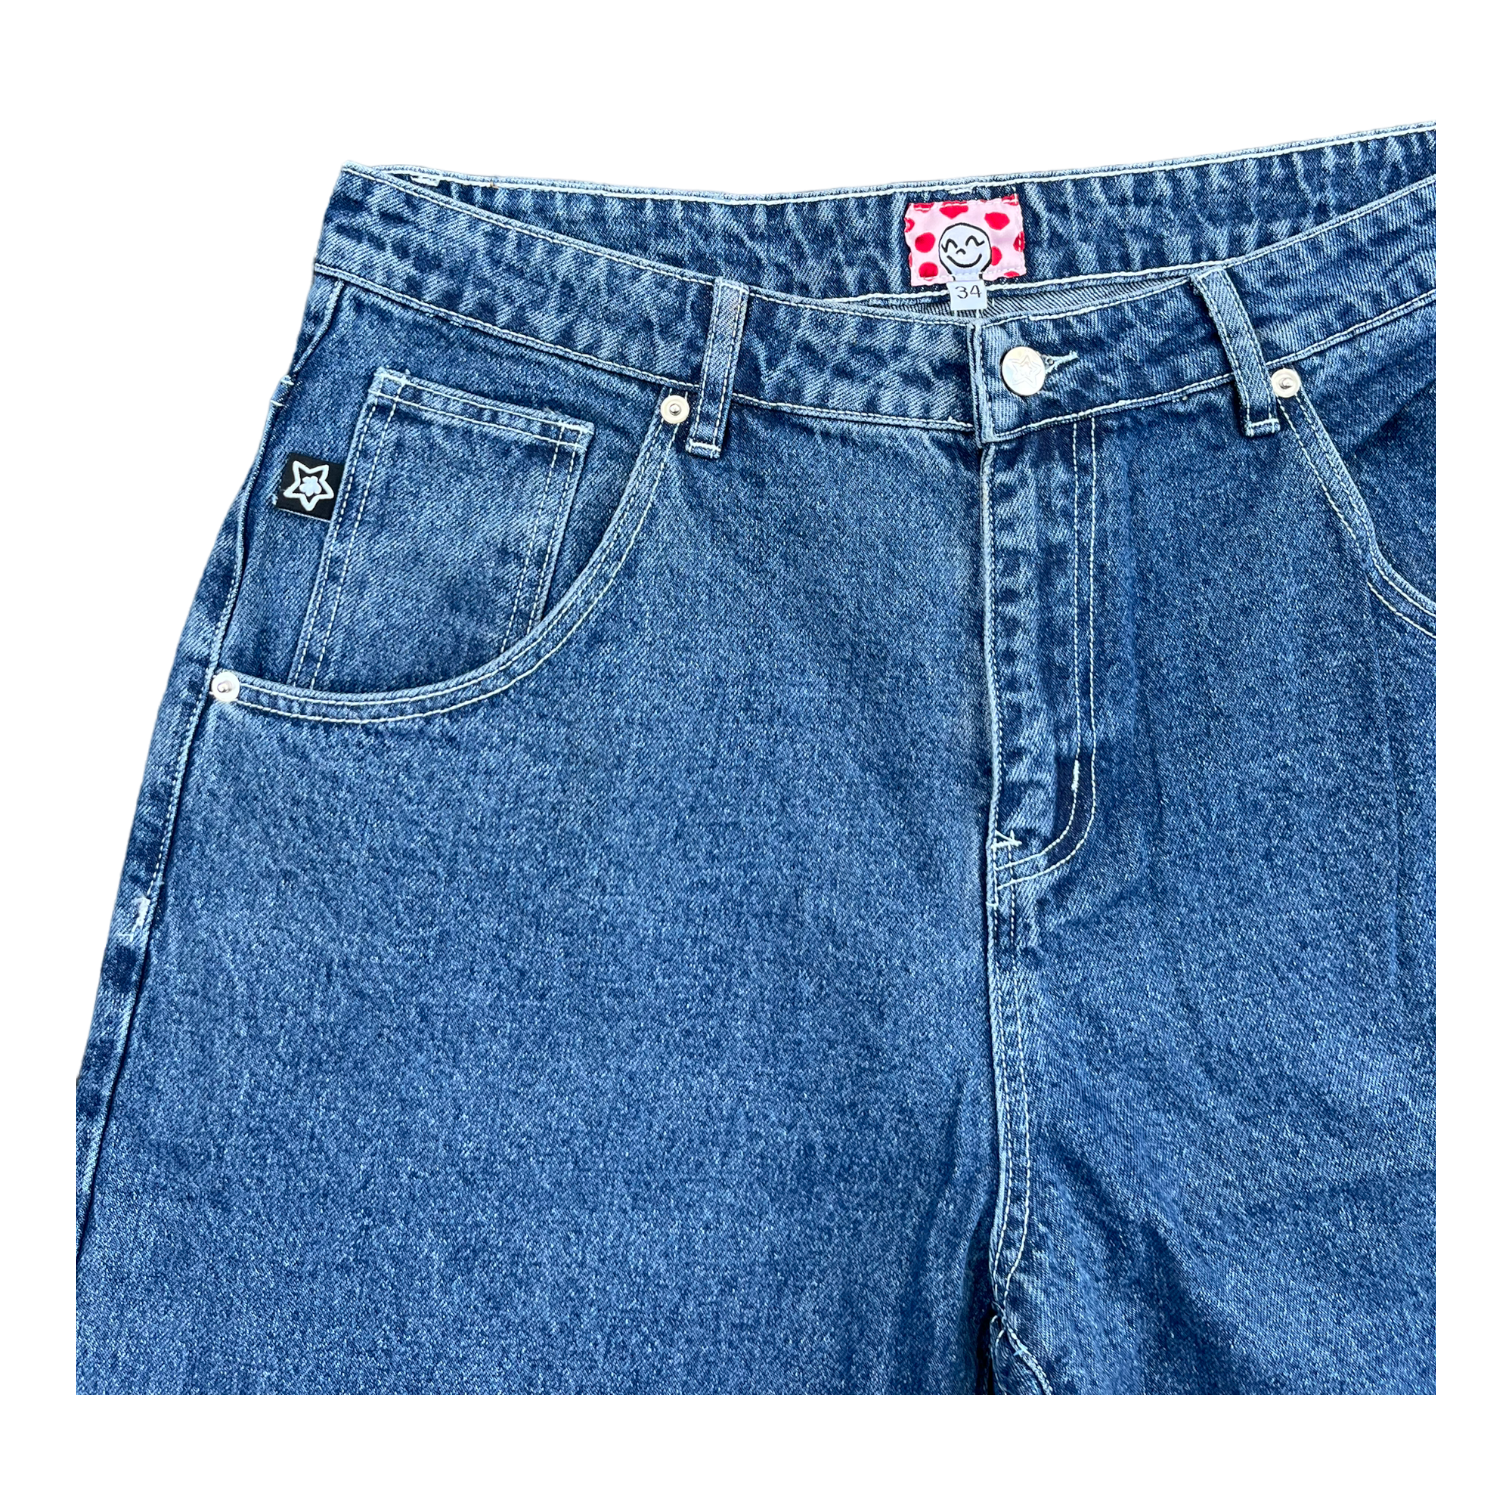 ZIP OFF STAR JEANS (Blue) – The Star Team